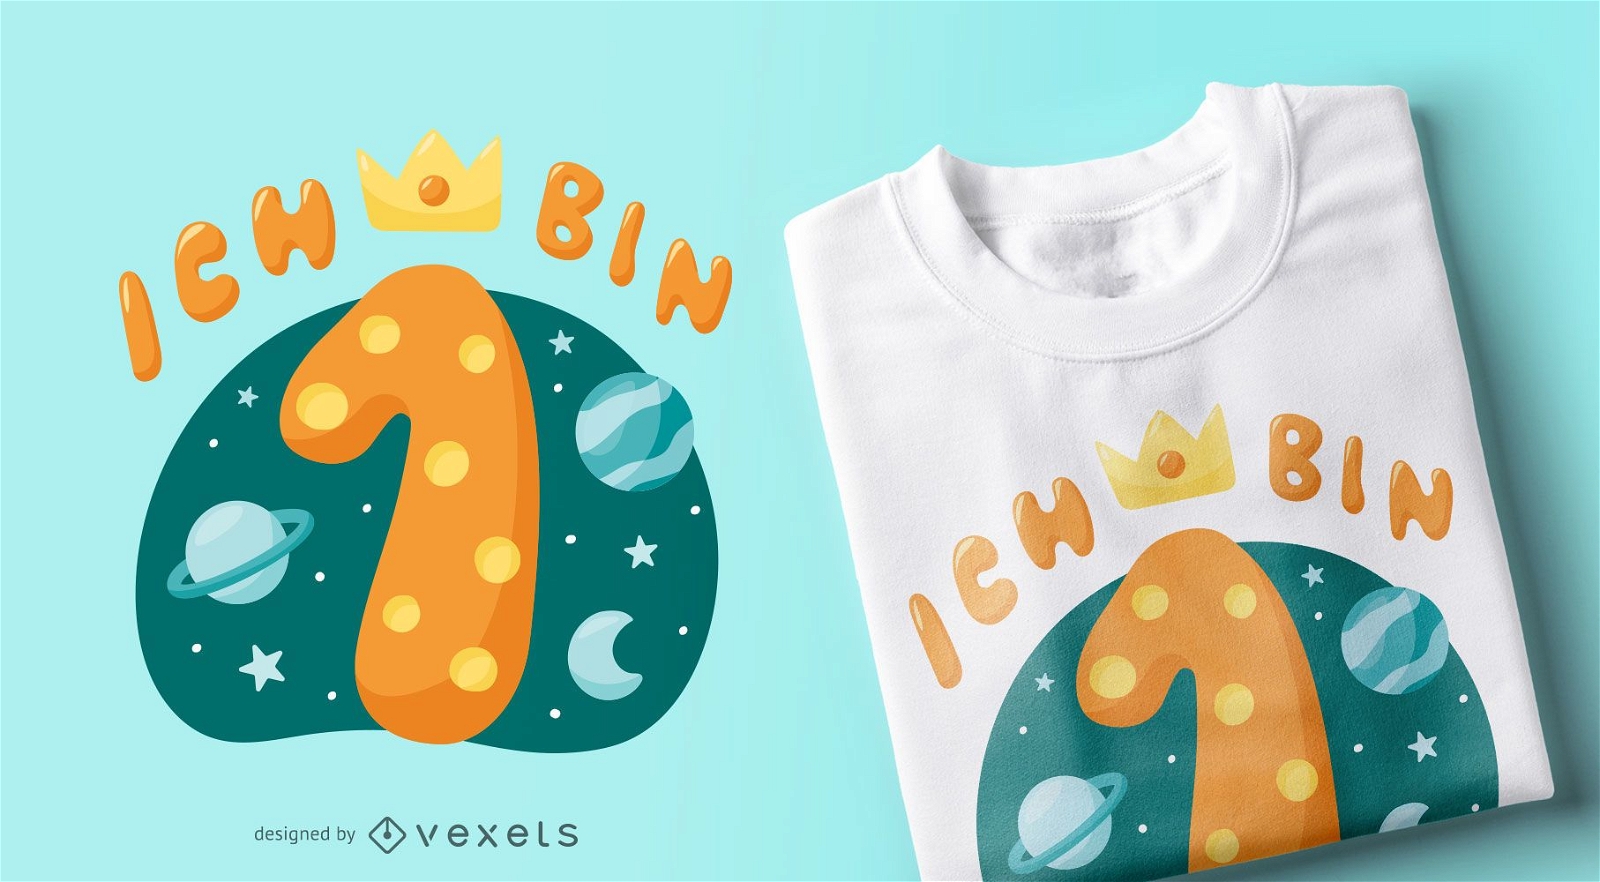 One year old space t-shirt design